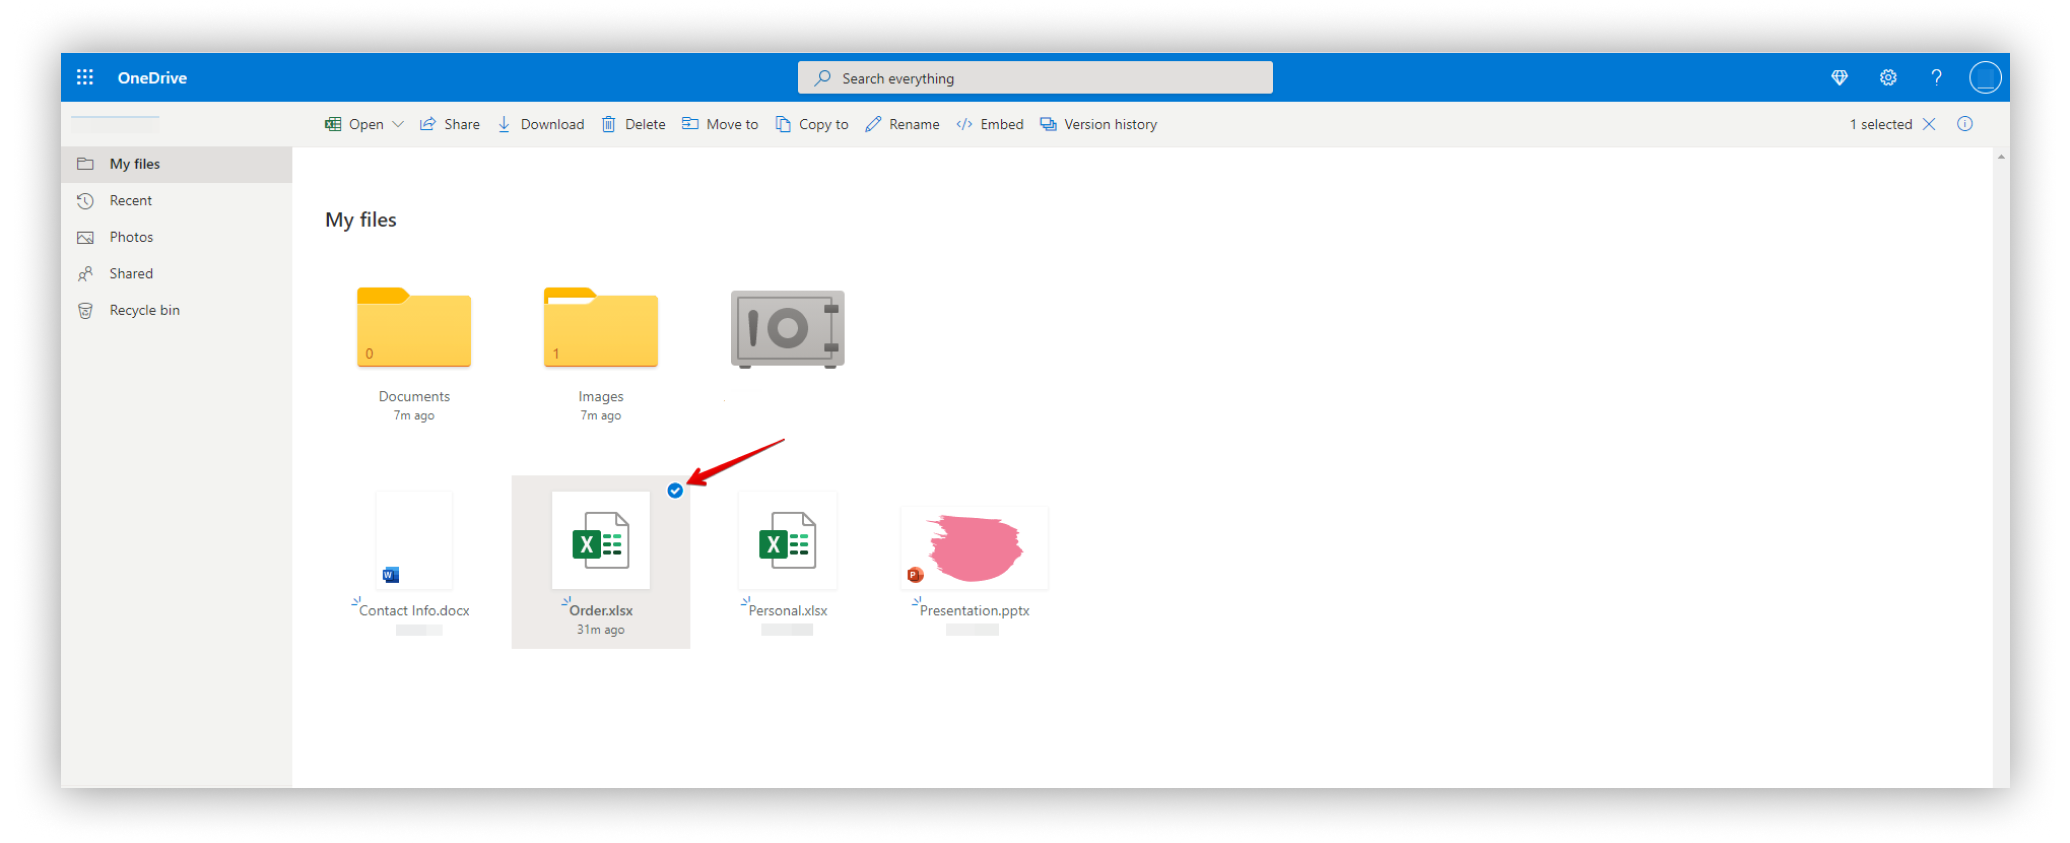 How to copy embed code in Microsoft OneDrive?